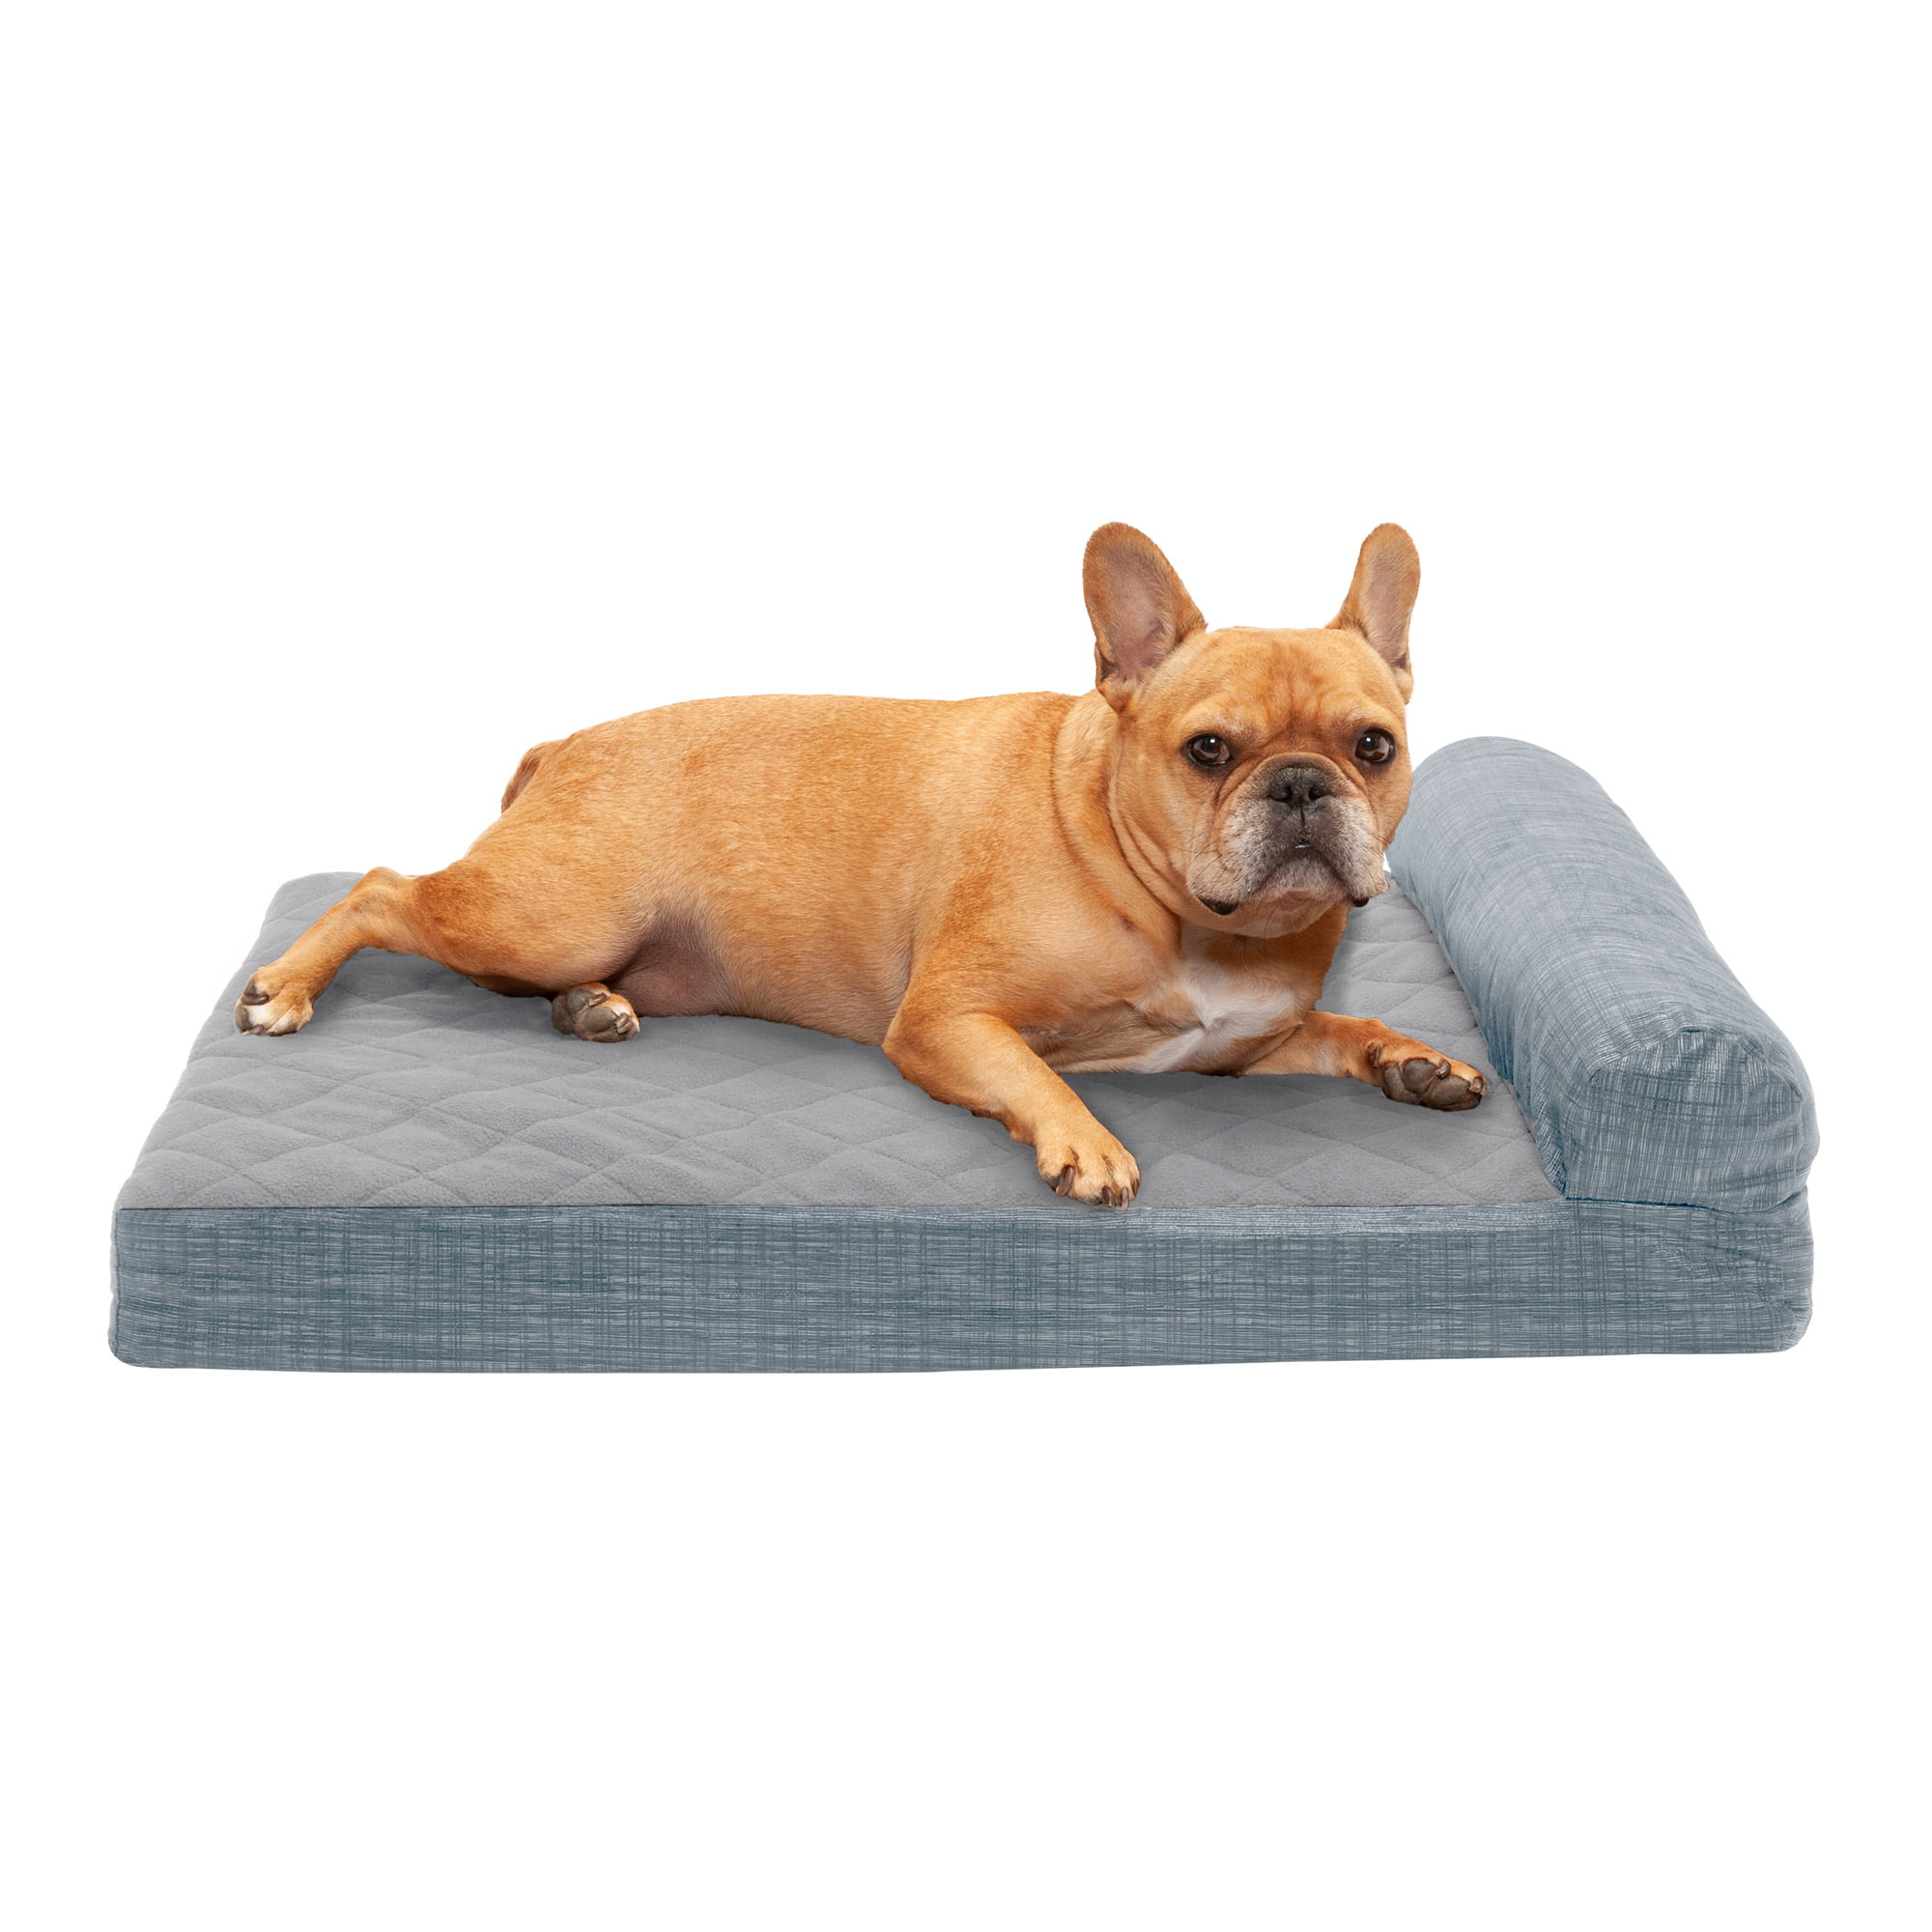 Furhaven Pet Dog Bed Dark Blue Deluxe Cooling Gel Memory Foam Quilted Fleece and Print Suede Chaise Lounge Living Room Couch Pet Bed with Removable Cover for Dogs and Cats Medium